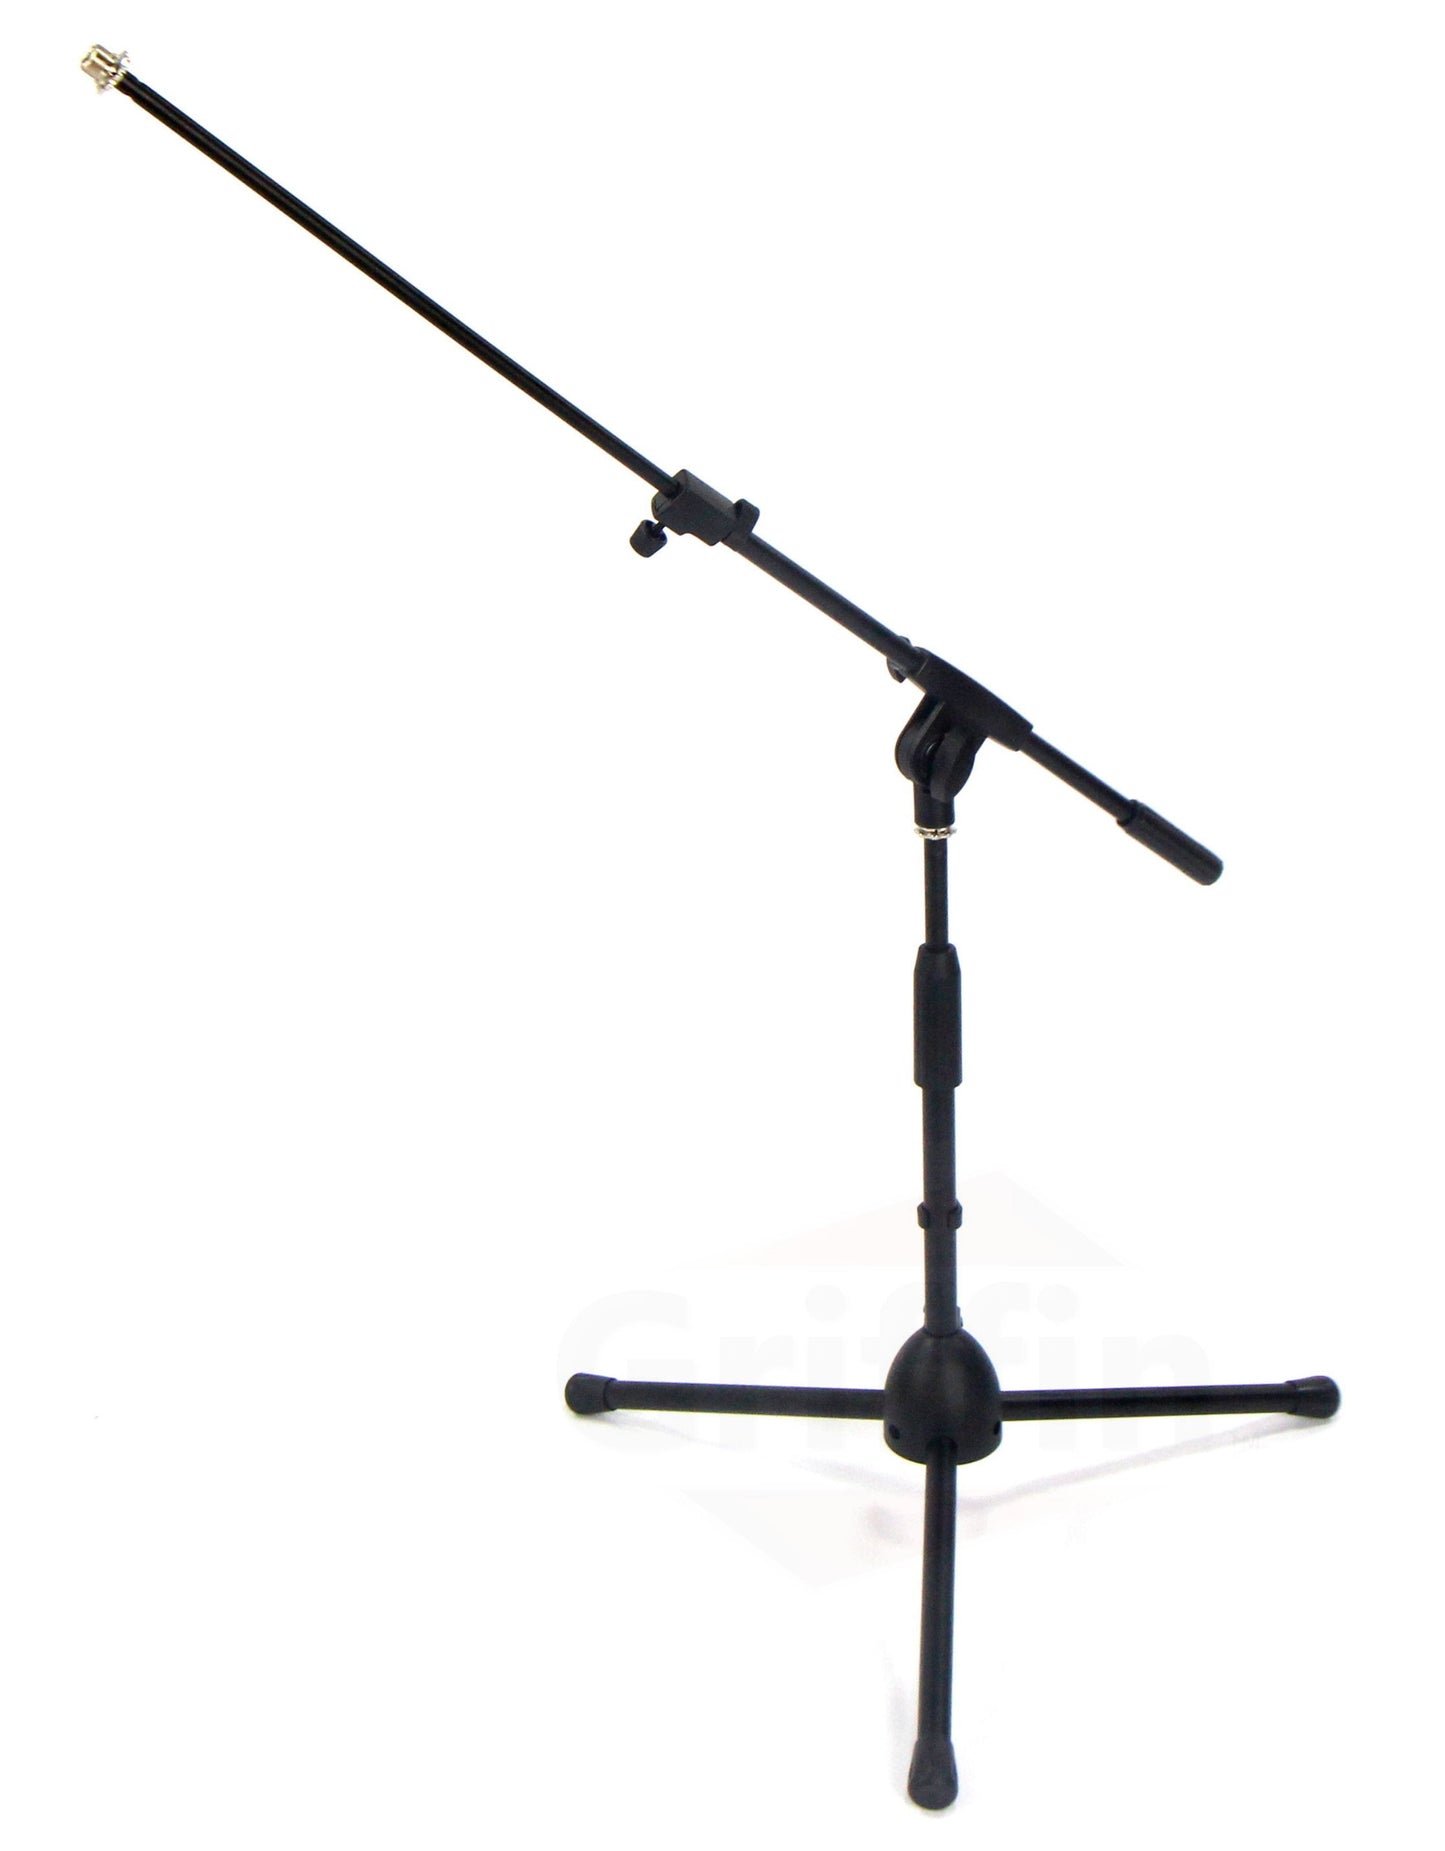 Short Microphone Stand with Boom Arm by GRIFFIN - Low Profile Tripod Mic Stand Mount for Kick Bass